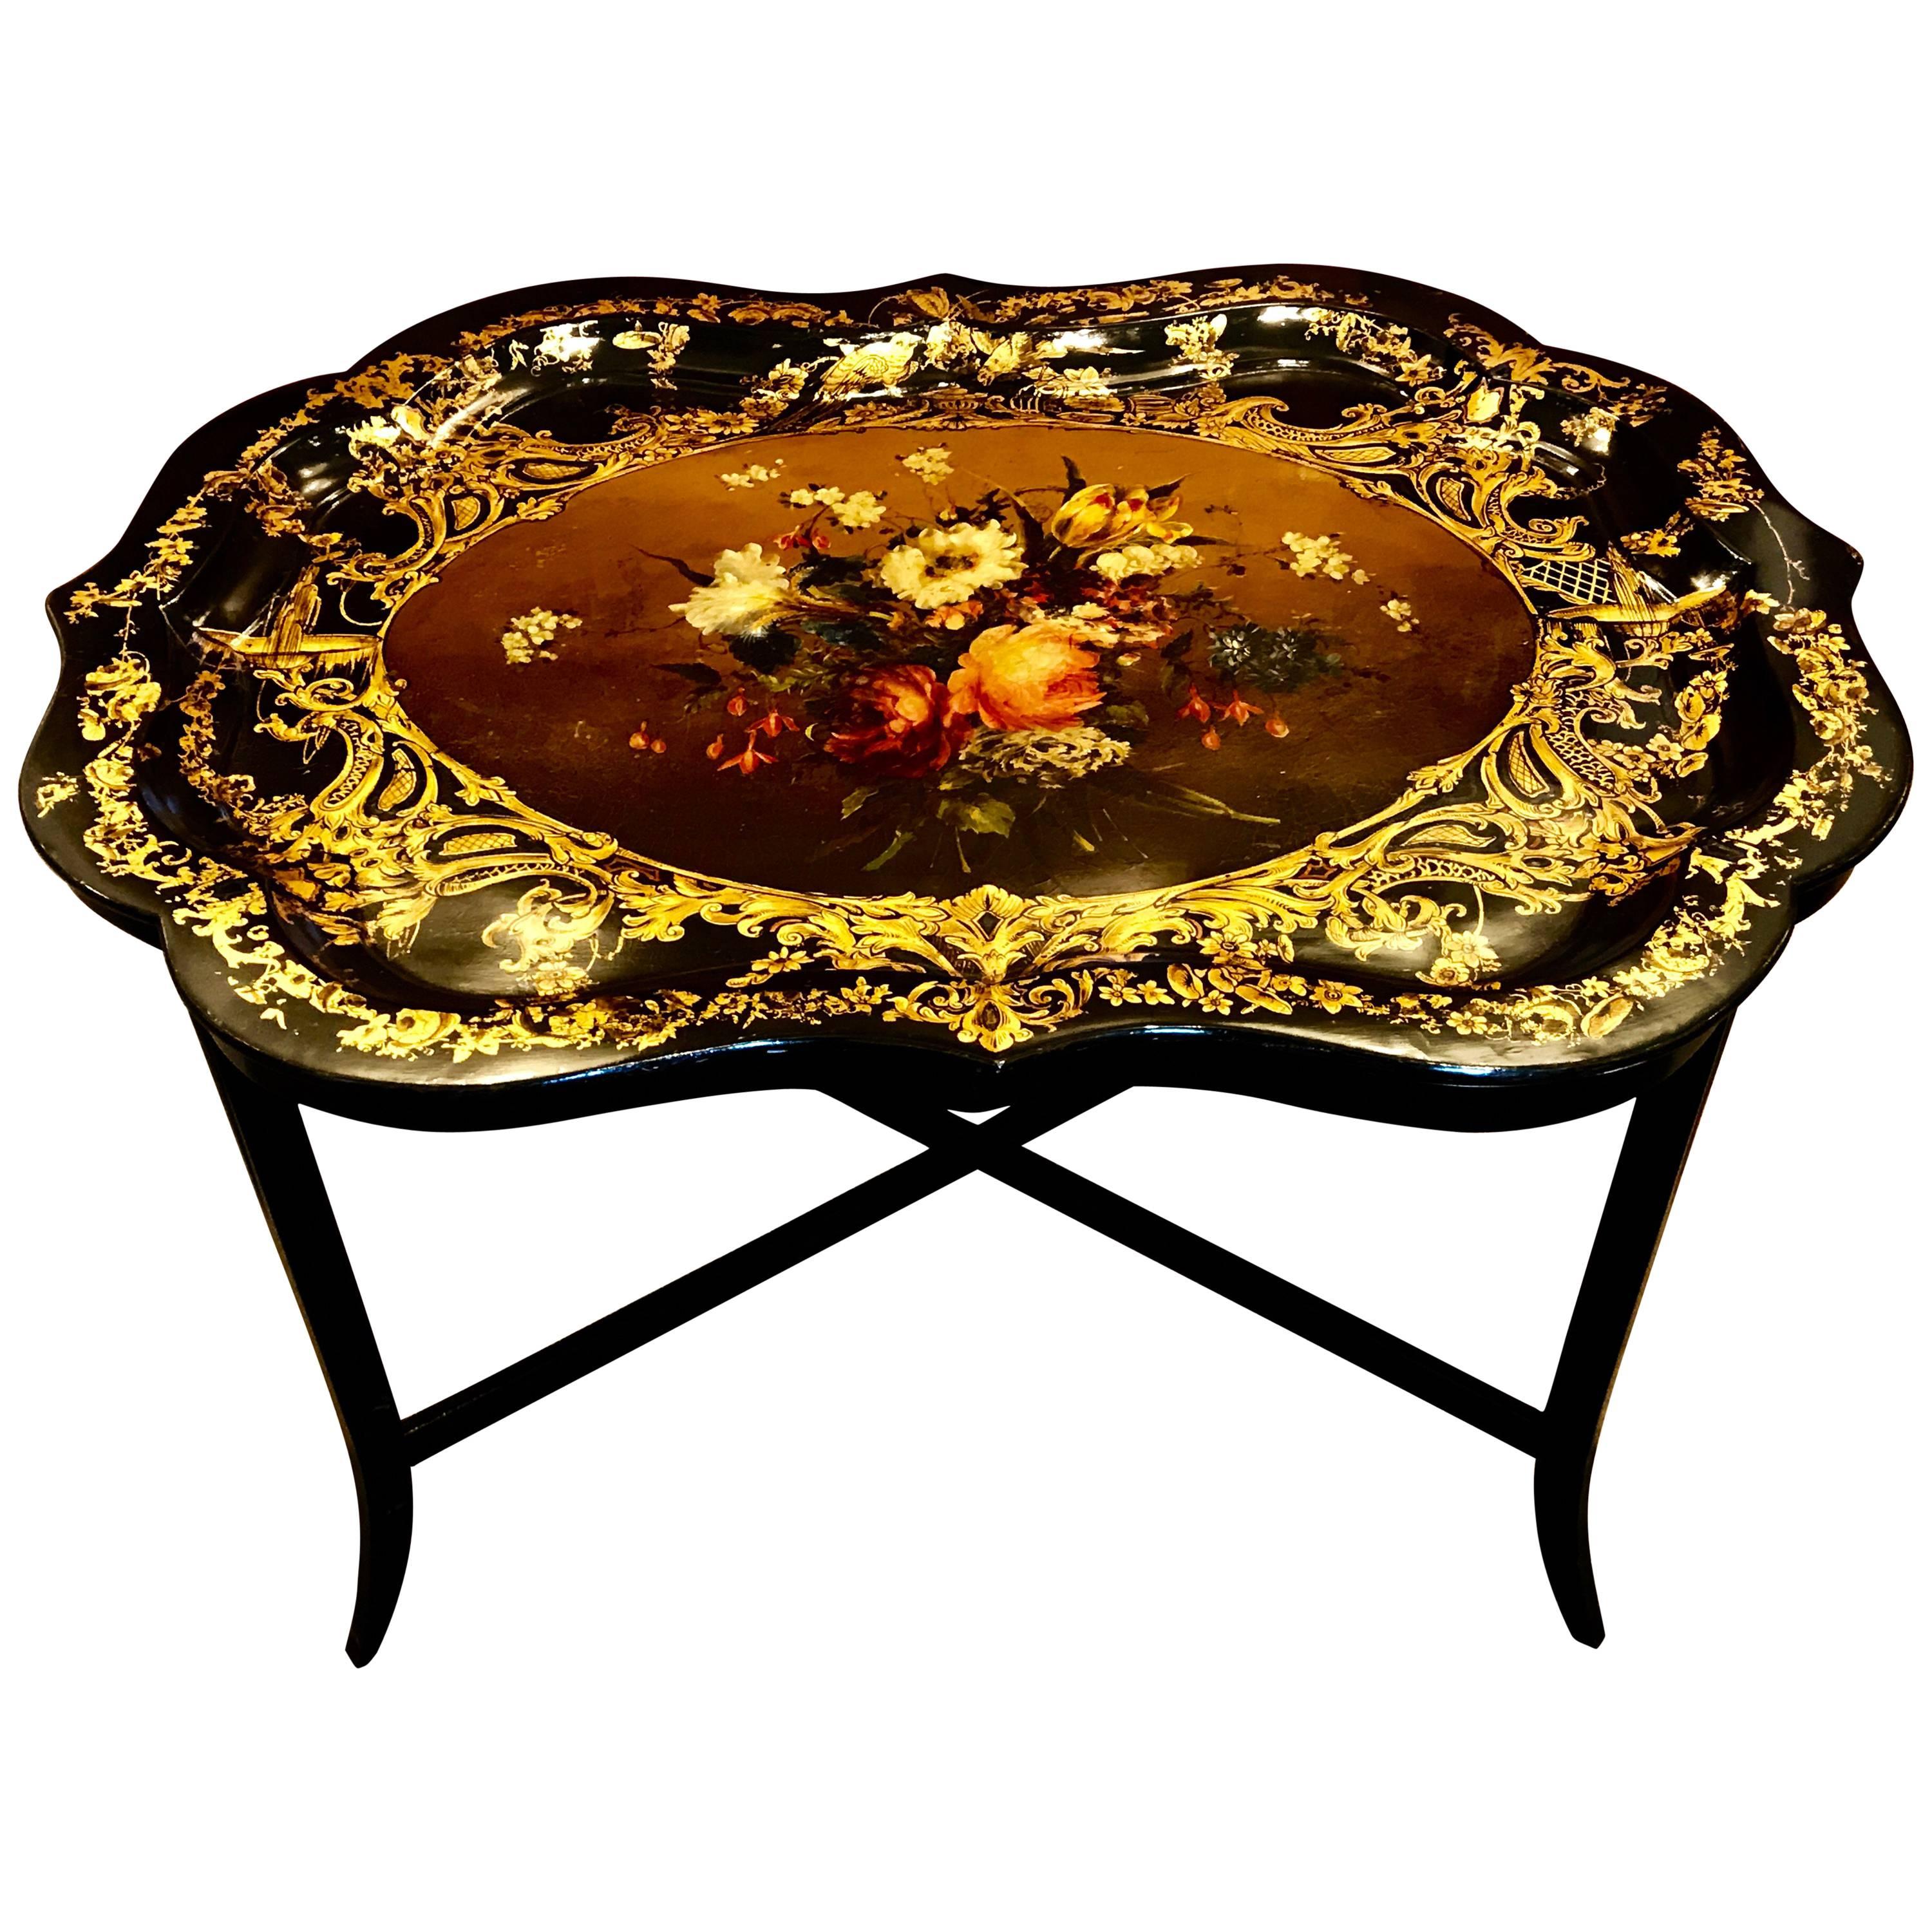 Stunning 19th Century English Papier Mâché Gilt Floral Tray, Now as a Table